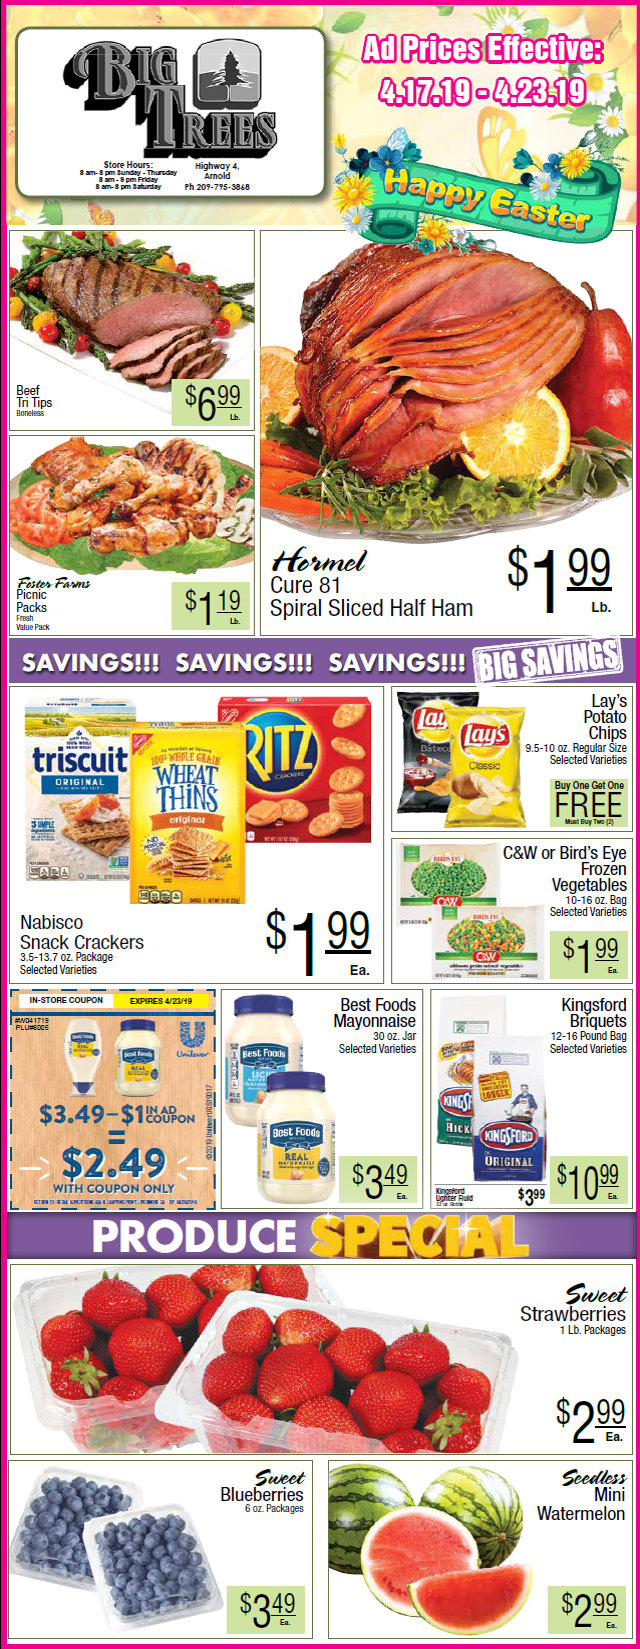 Big Trees Market Weekly Big Easter Ad & Grocery Specials Through April 23rd